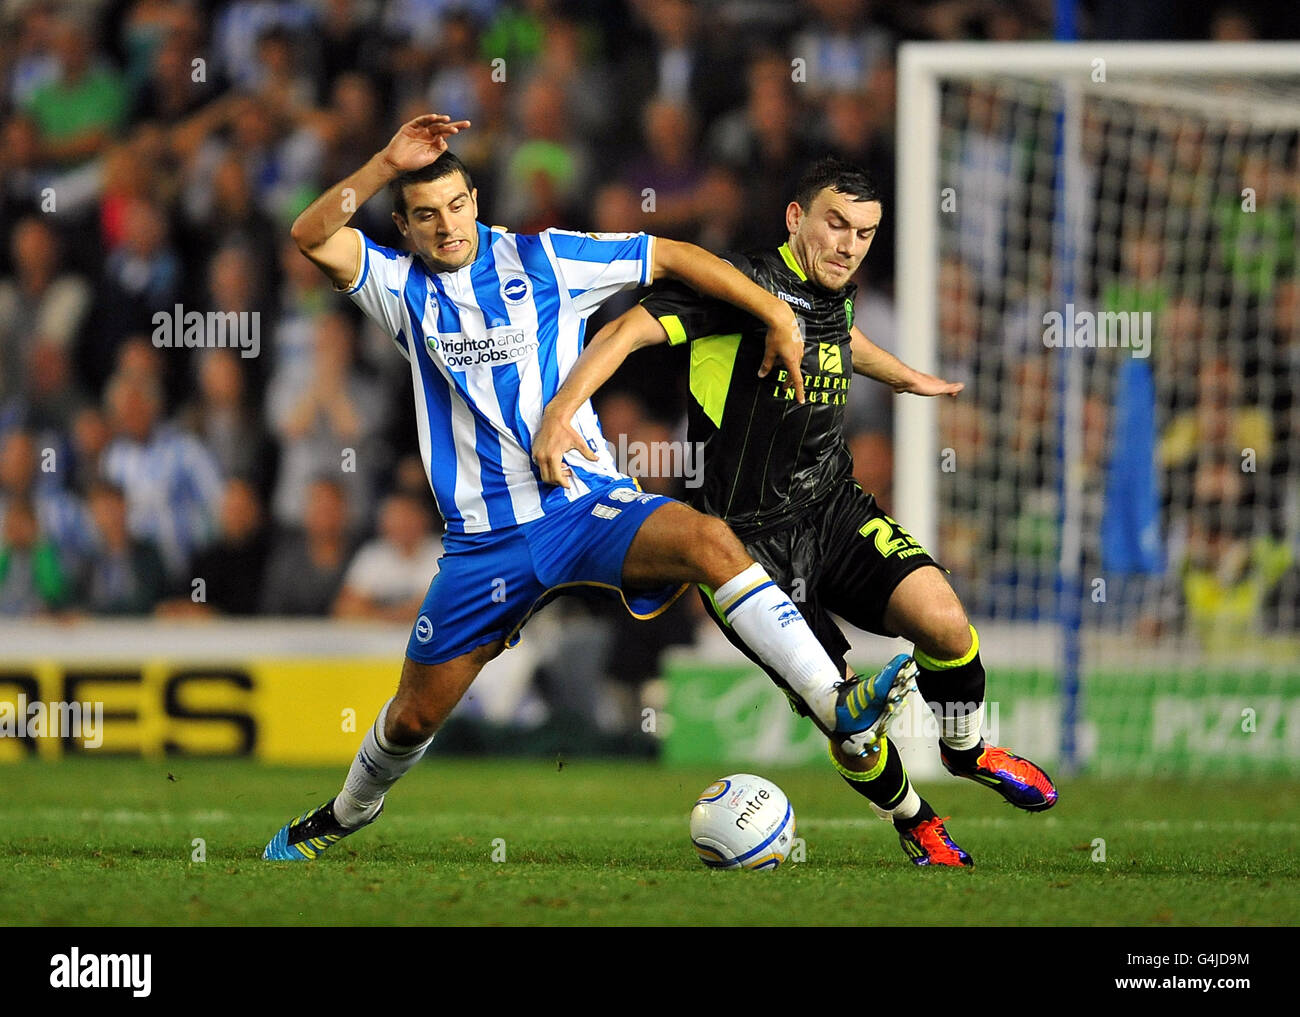 Soccer - npower Football League Championship - Brighton and Hove Albion v Leeds United - AMEX Stadium. Brighton and Hove Albion's Gary Dicker (left) and Leeds United's Robert Snodgrass battle for the ball Stock Photo